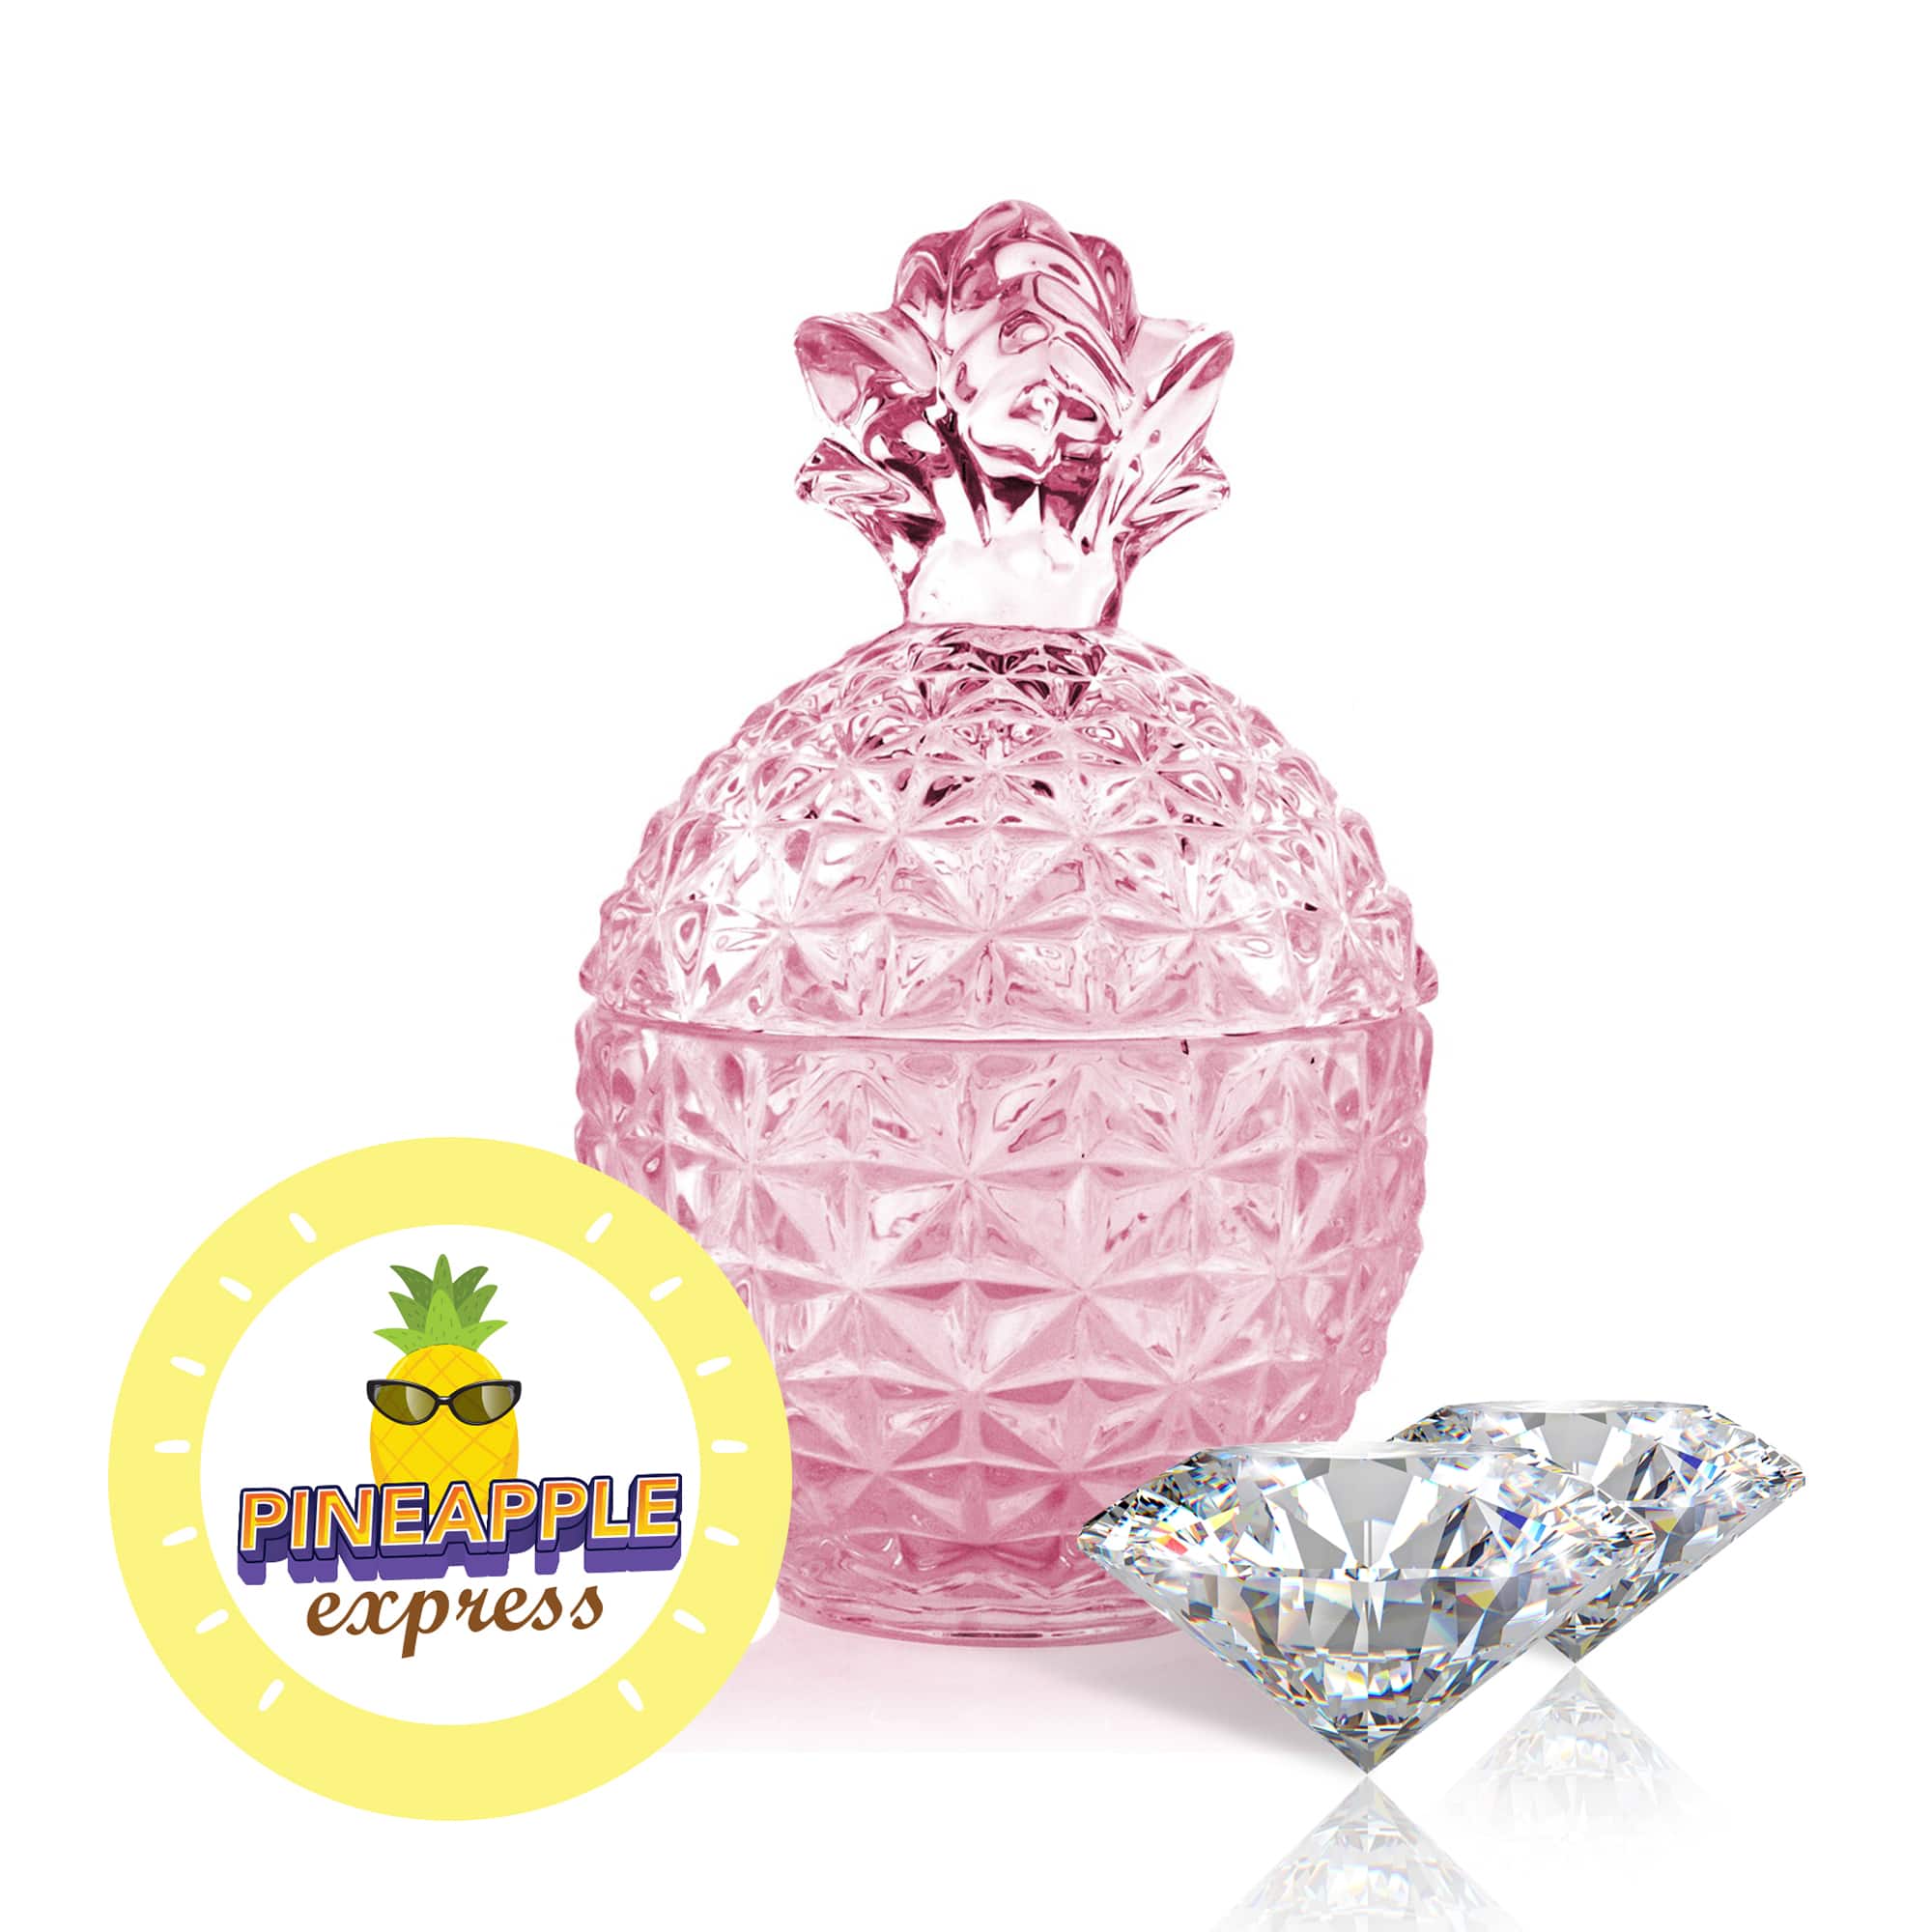 Pineapple Express Limited 2 Diamond Candle